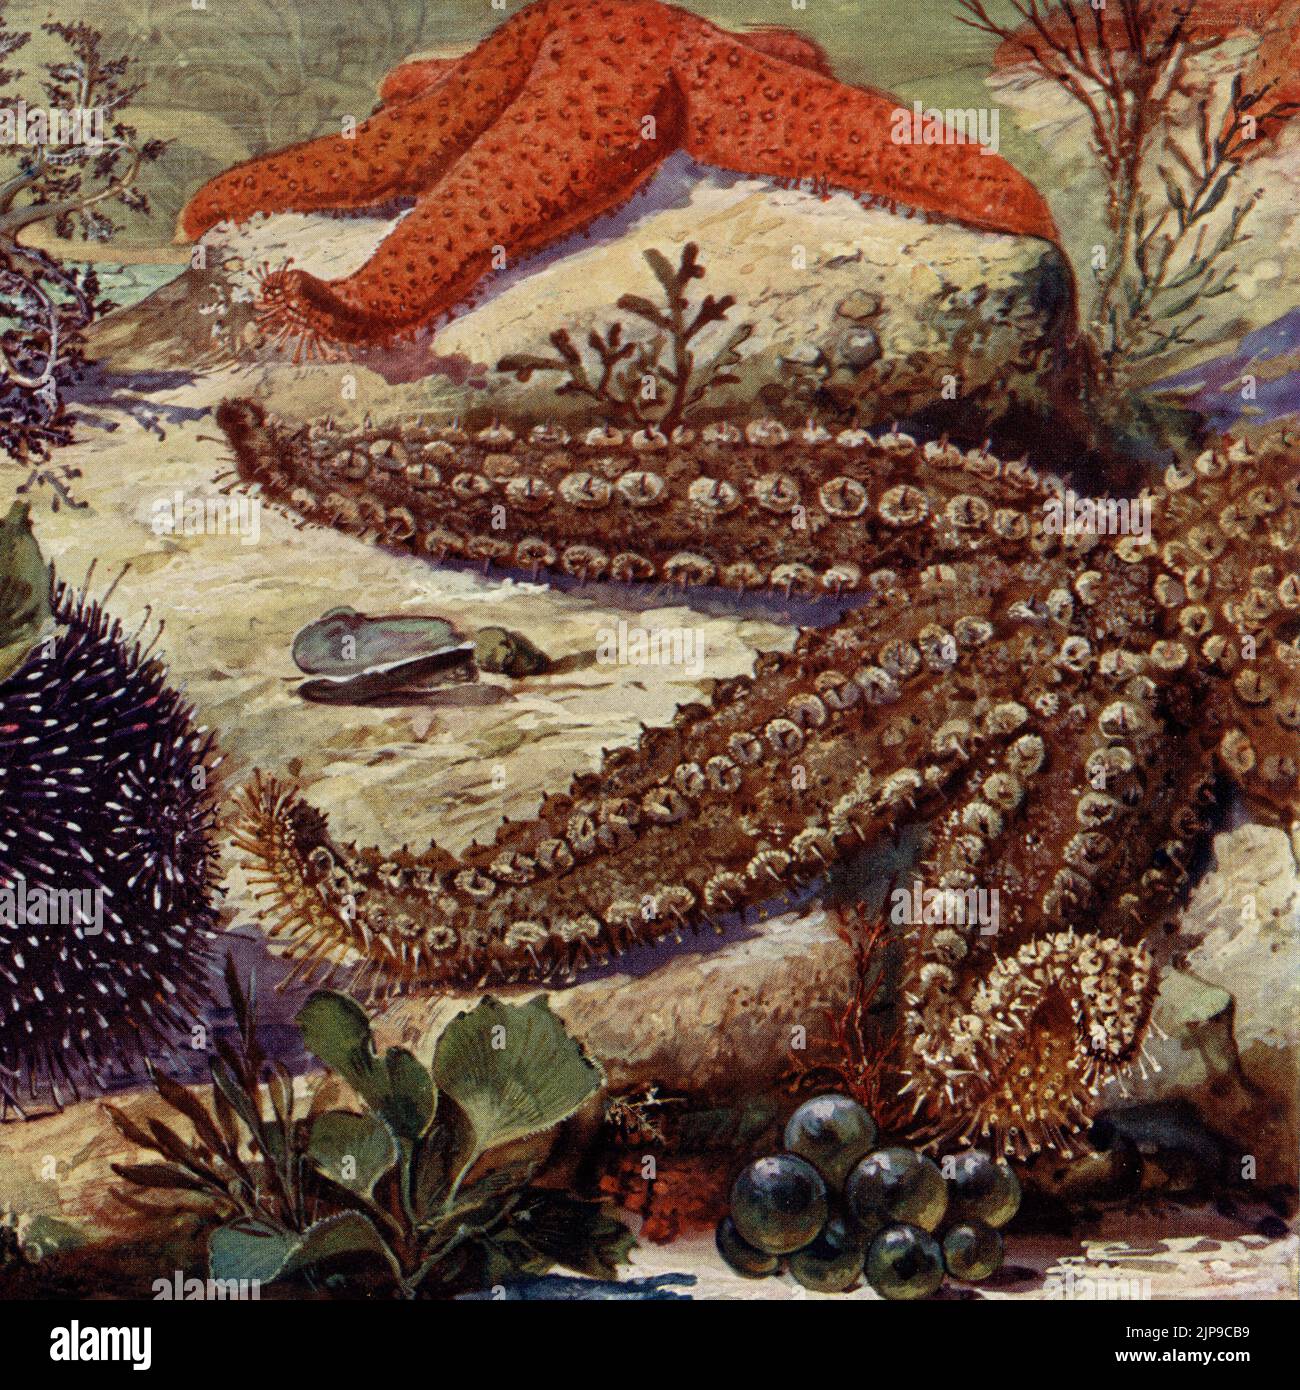 Seabed marine invertebrates:  Sea Cucumber (Cucumaria planci), Violet or Purple Sea Urchin (Sphaerechinus granularis), Red Starfish (Echinaster sepositus) and Spiny Starfish (Marthasterias glacialis). Depicted in a rare early 1900s German chromolithograph print of a painting by wildlife artist, Paul Flanderky (1872-1937).  It helped to illustrate the (1911-18) 4th edition of Brehms Tierleben (Brehm’s Animal Life). Stock Photo